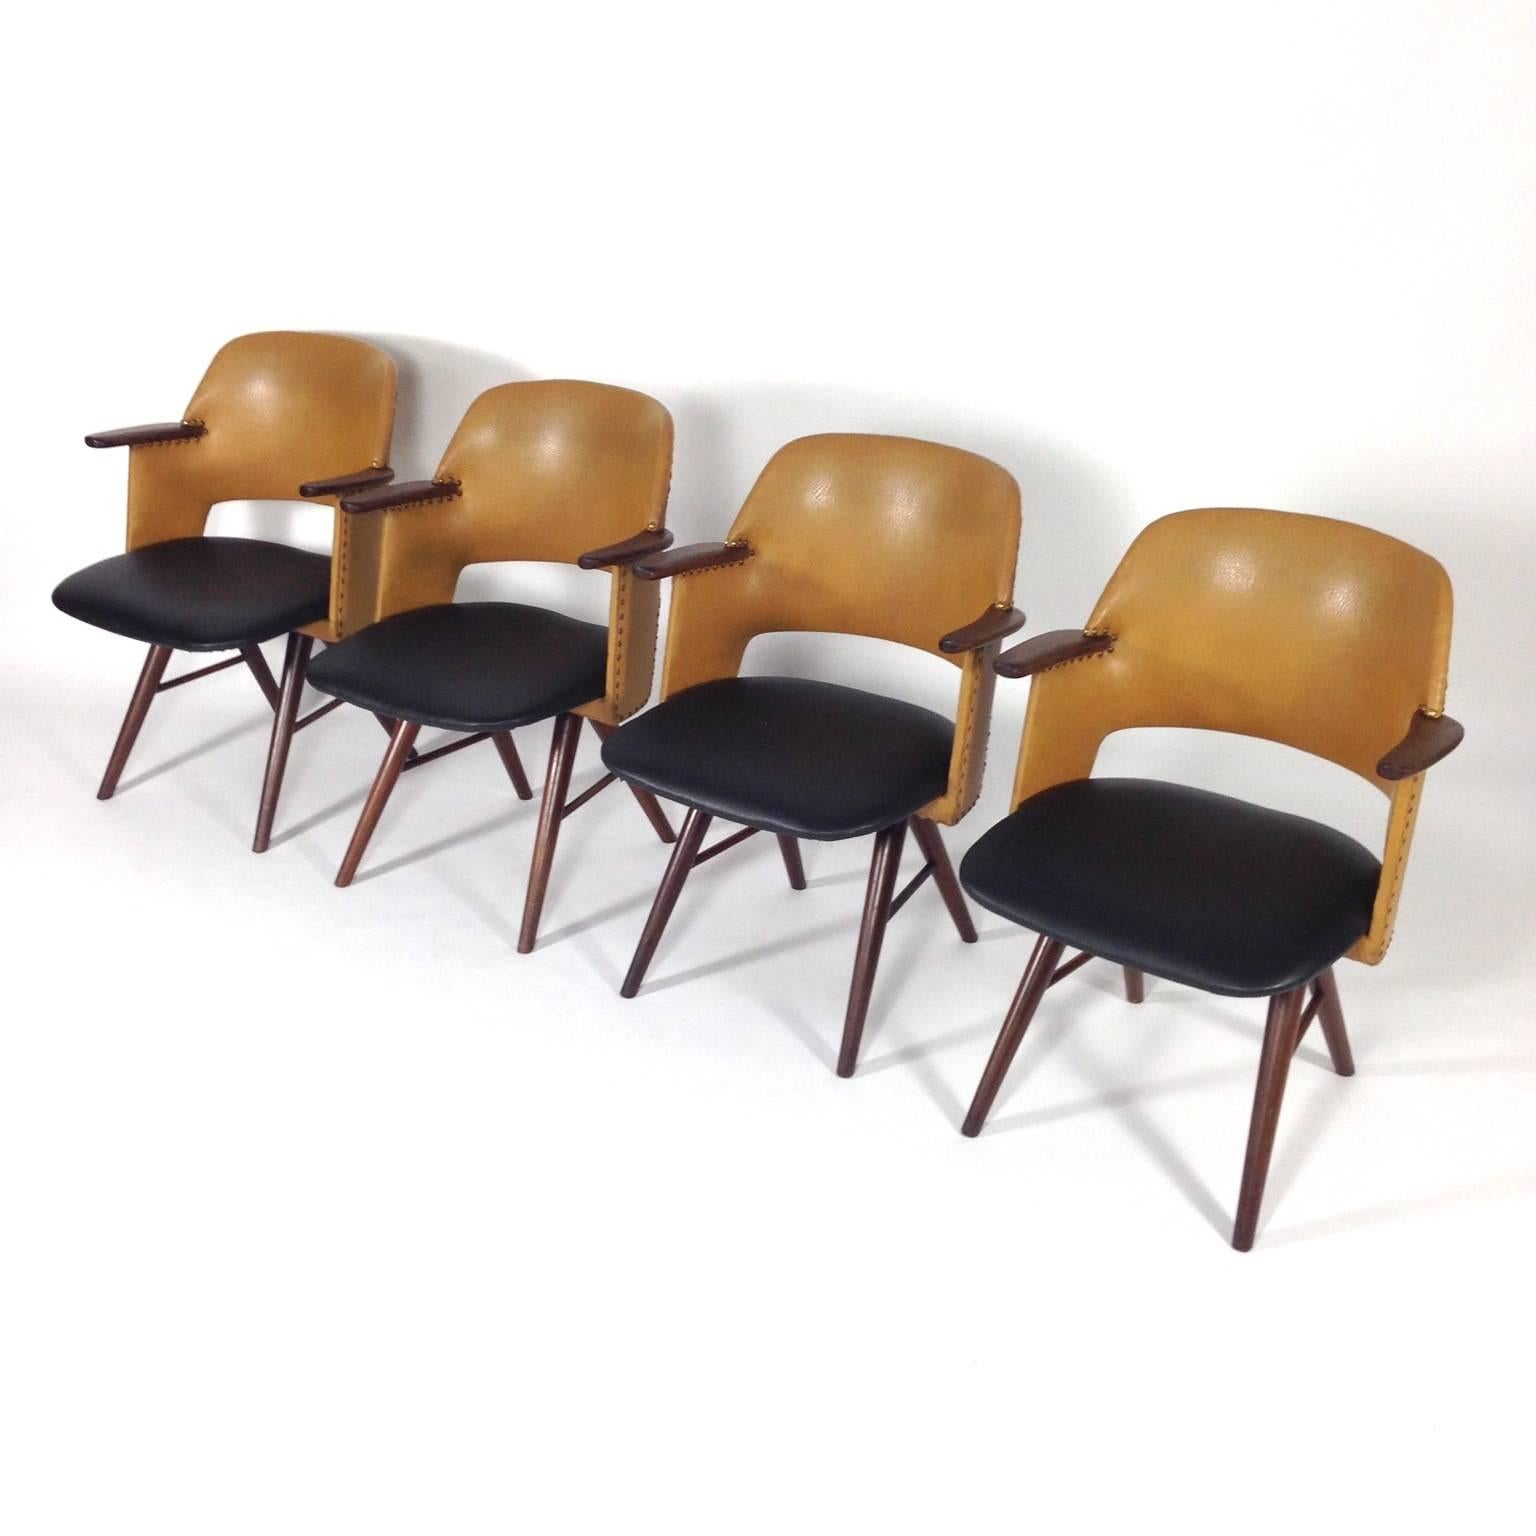 Extraordinary set of 4 FE30 dining chairs with scissor legs.
The yellow gold backs are original and the black seats are reupholstered in the original way.
Solid Teak base with leatherette upholstery. 
The set is in very good to excellent